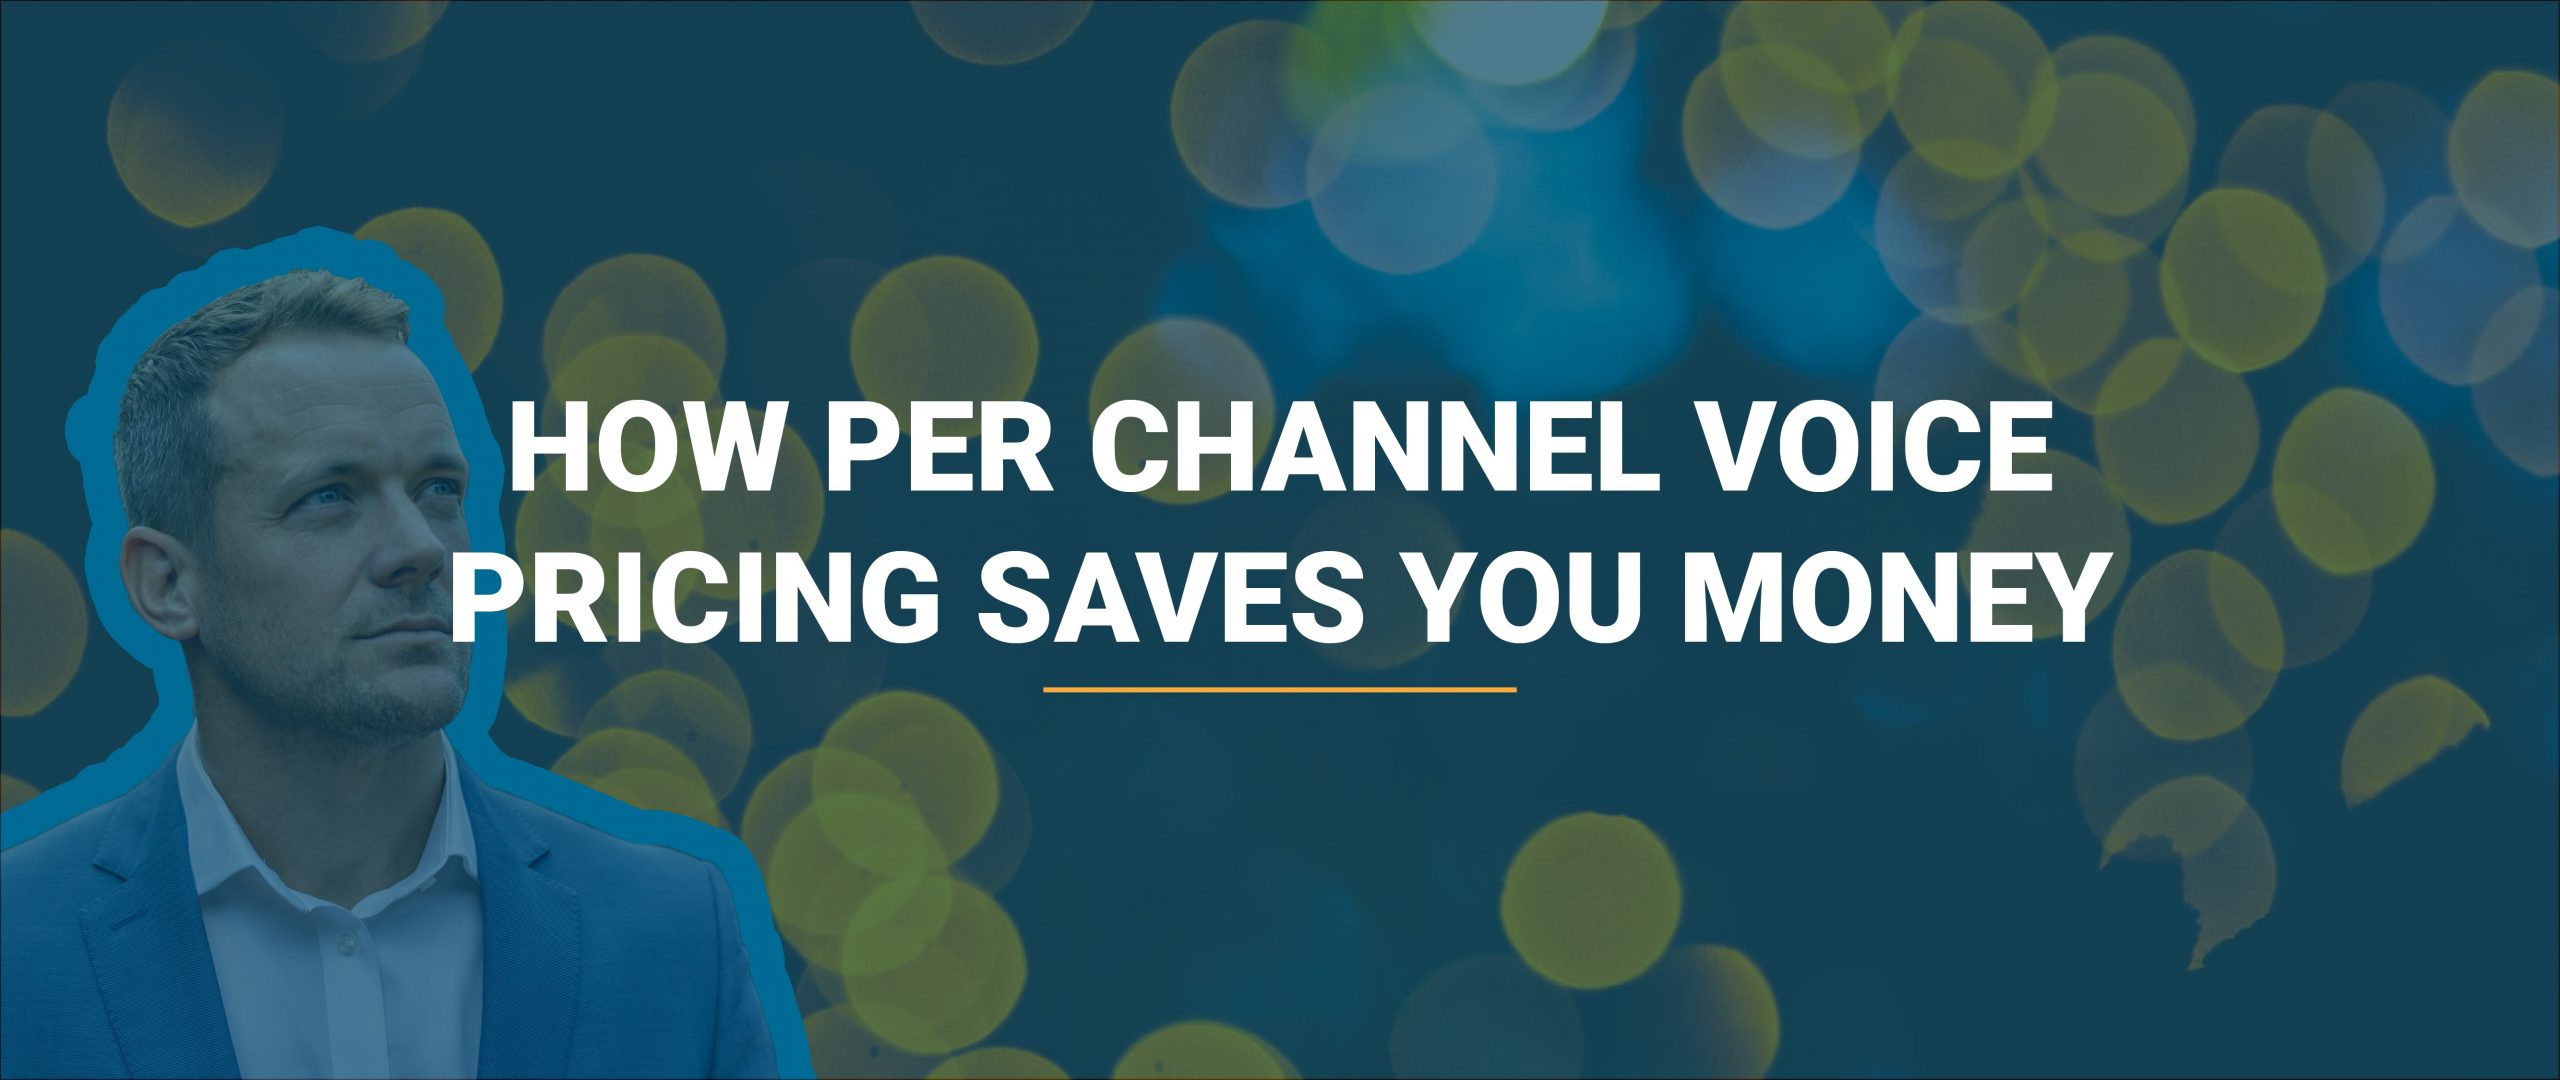 how per channel voice pricing saves you money